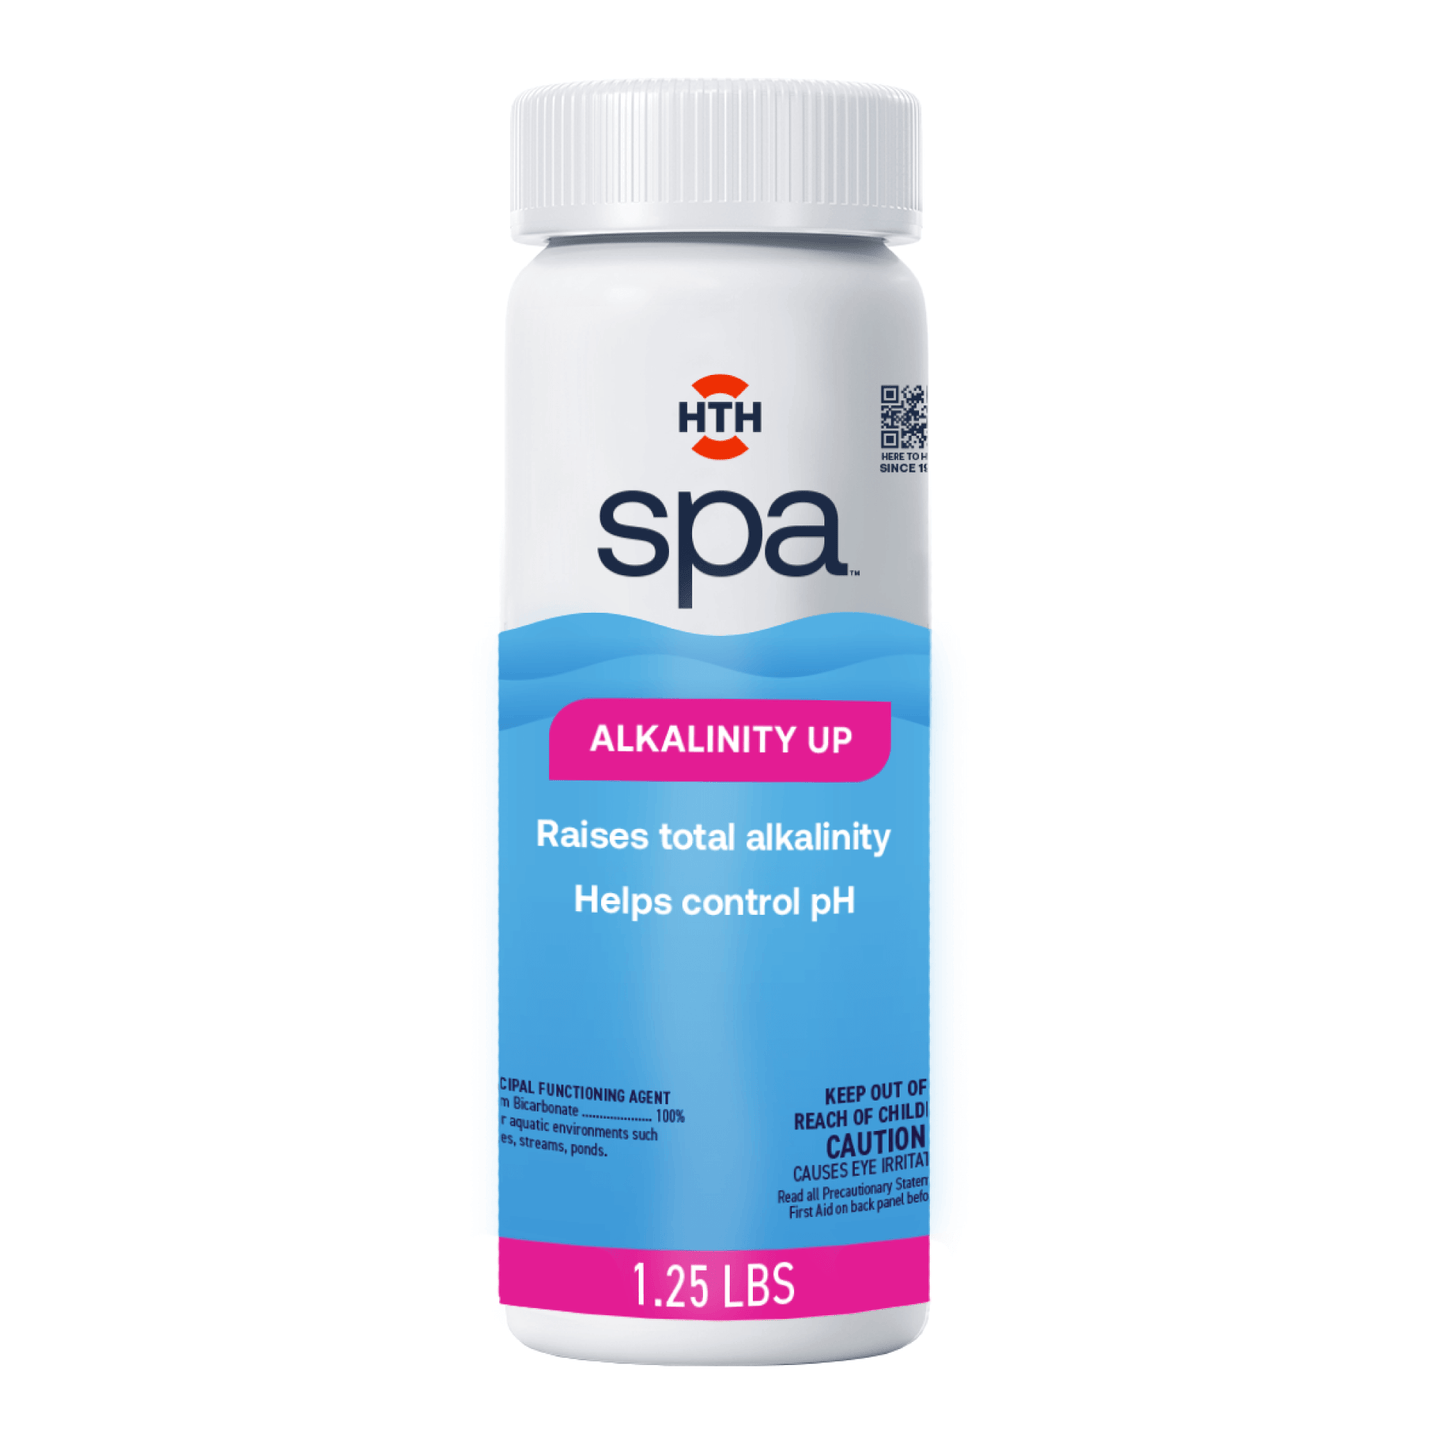 A 1.25lbs plastic bottle of HTH Spa care alkalinity up for hot tub treatment